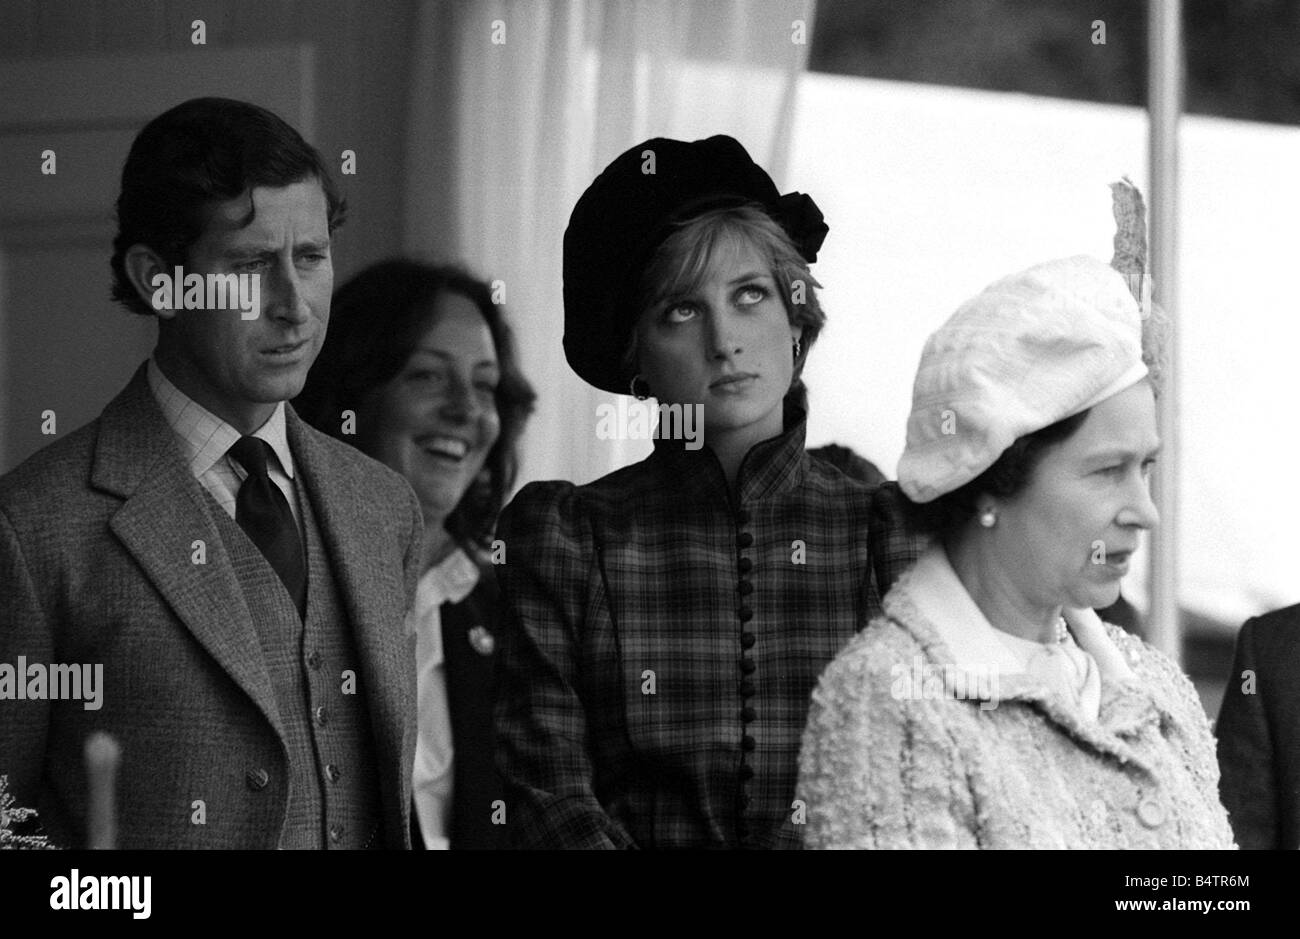 Prince Charles Princess Diana and The Queen September 1981 Royalty at the Braemar for the Highland games Stock Photo